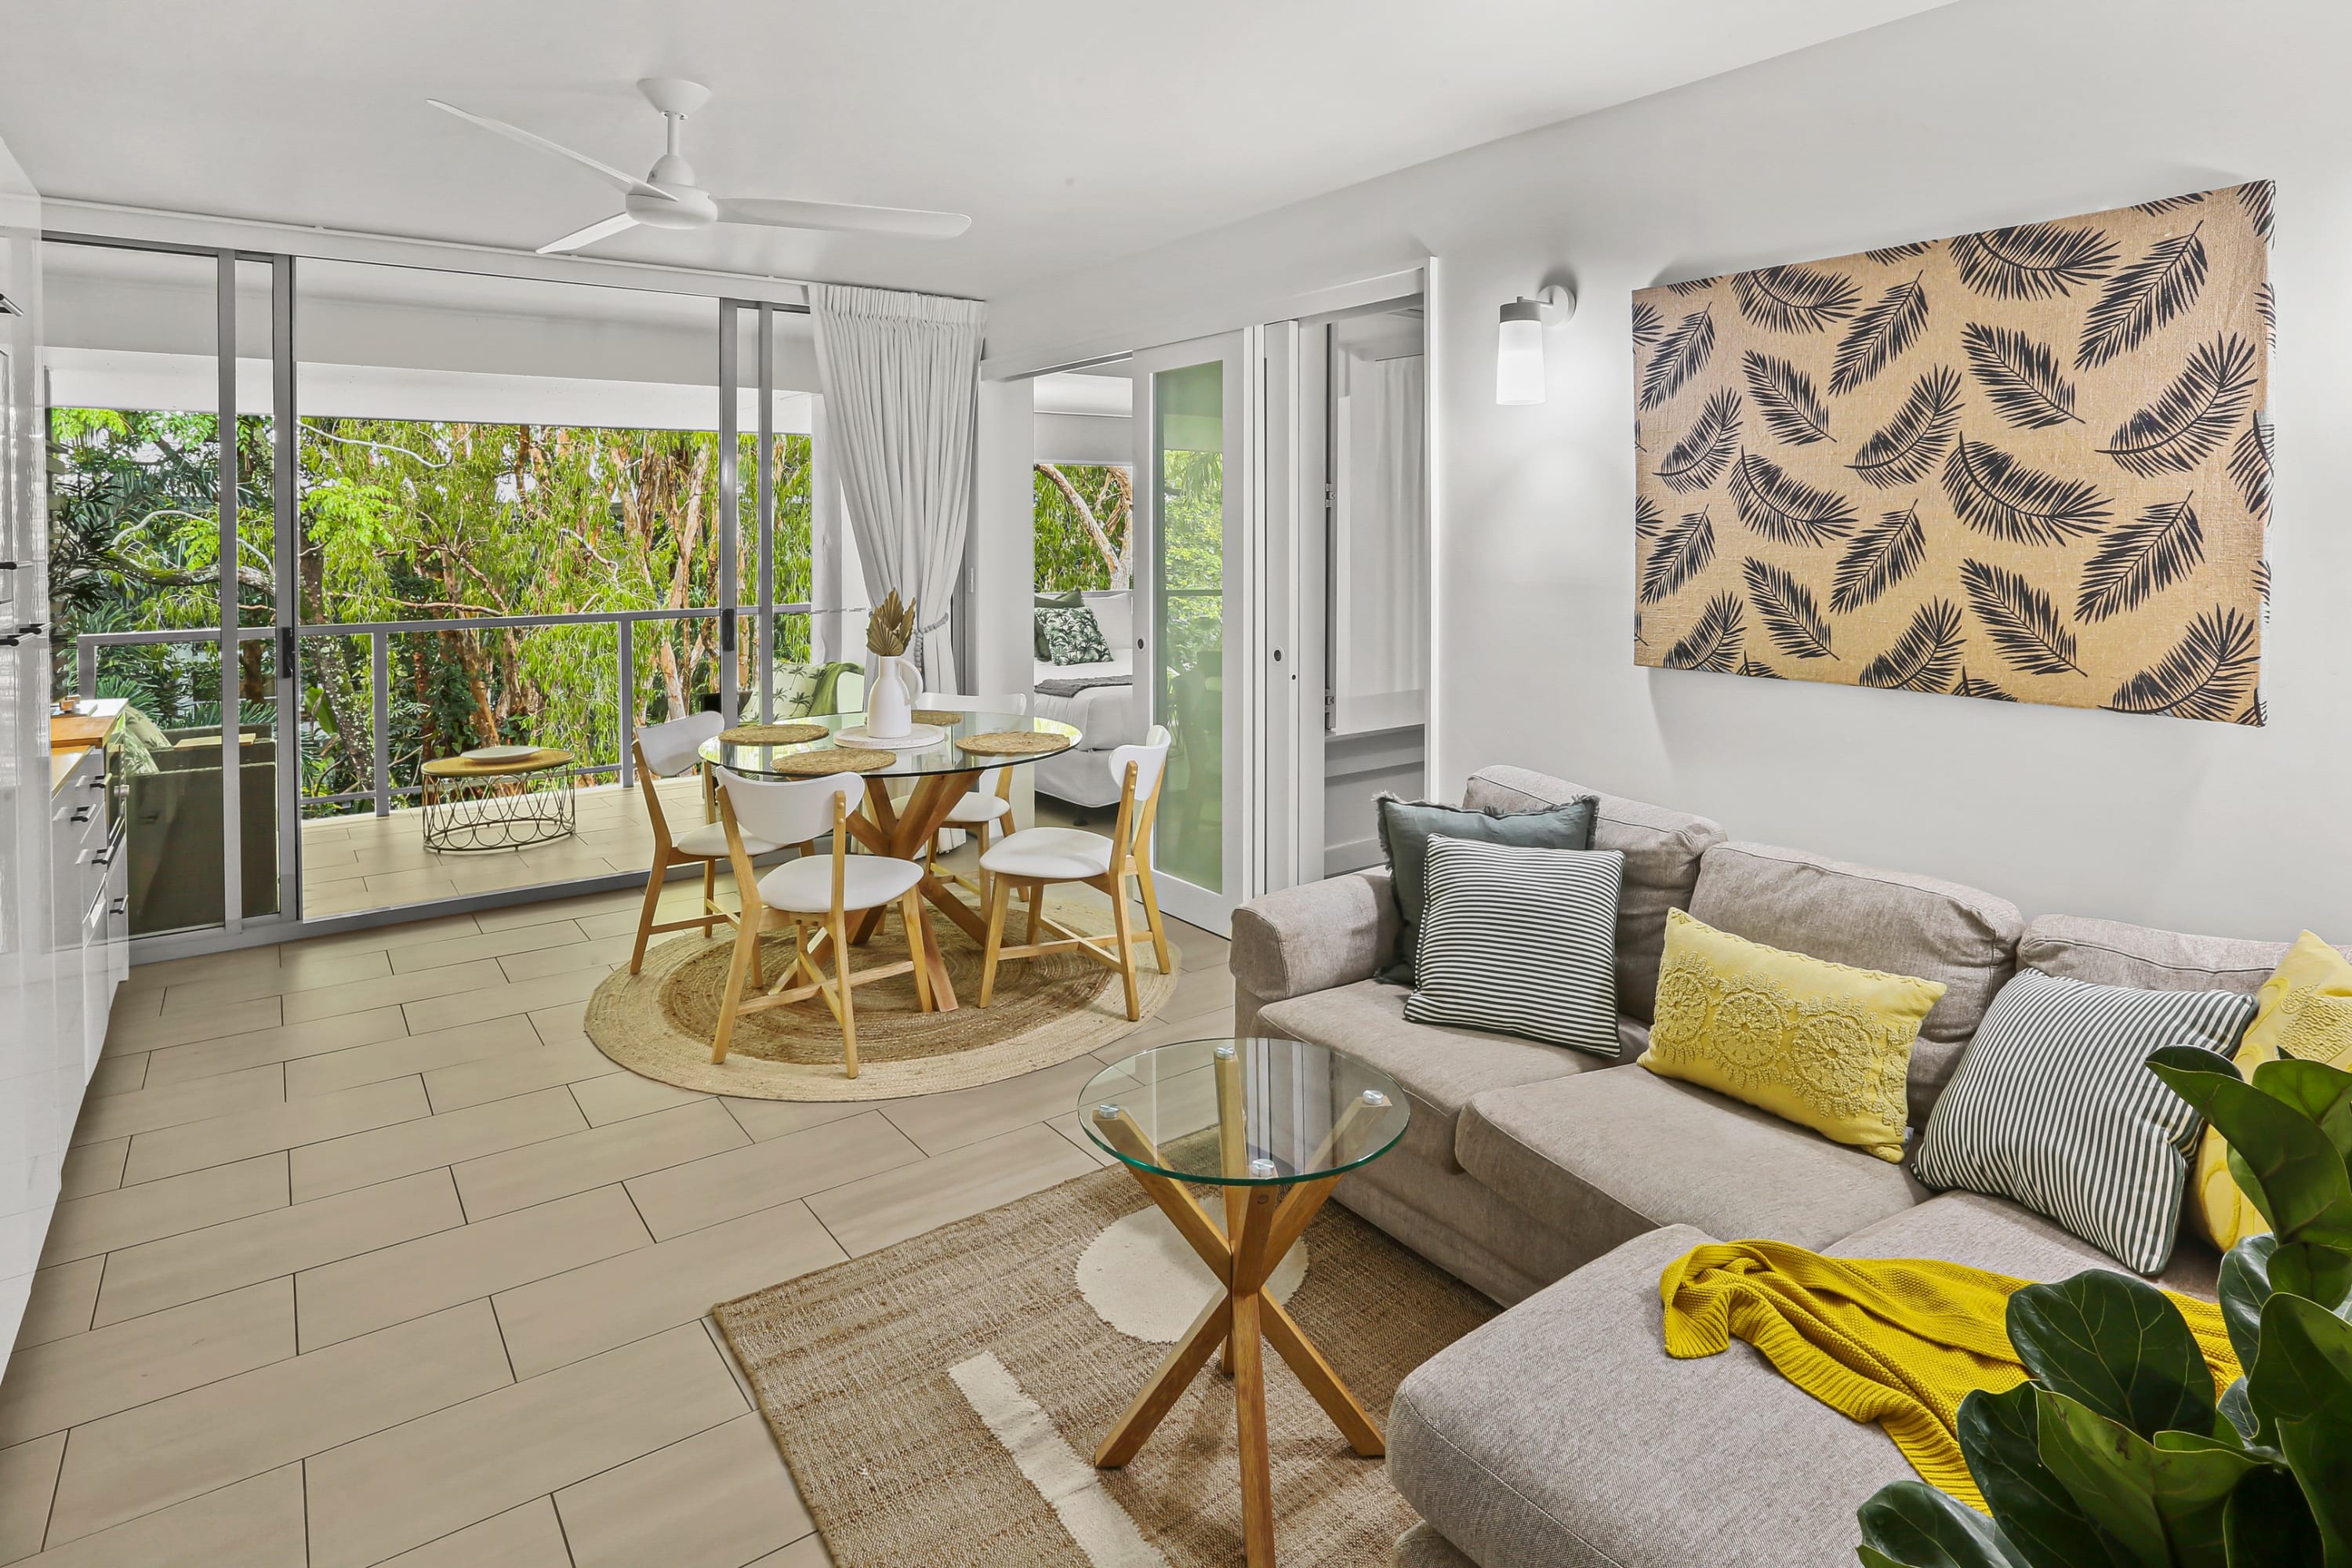 Property Image 1 - Airy Apartment in Palm Cove with Open Plan Living Area